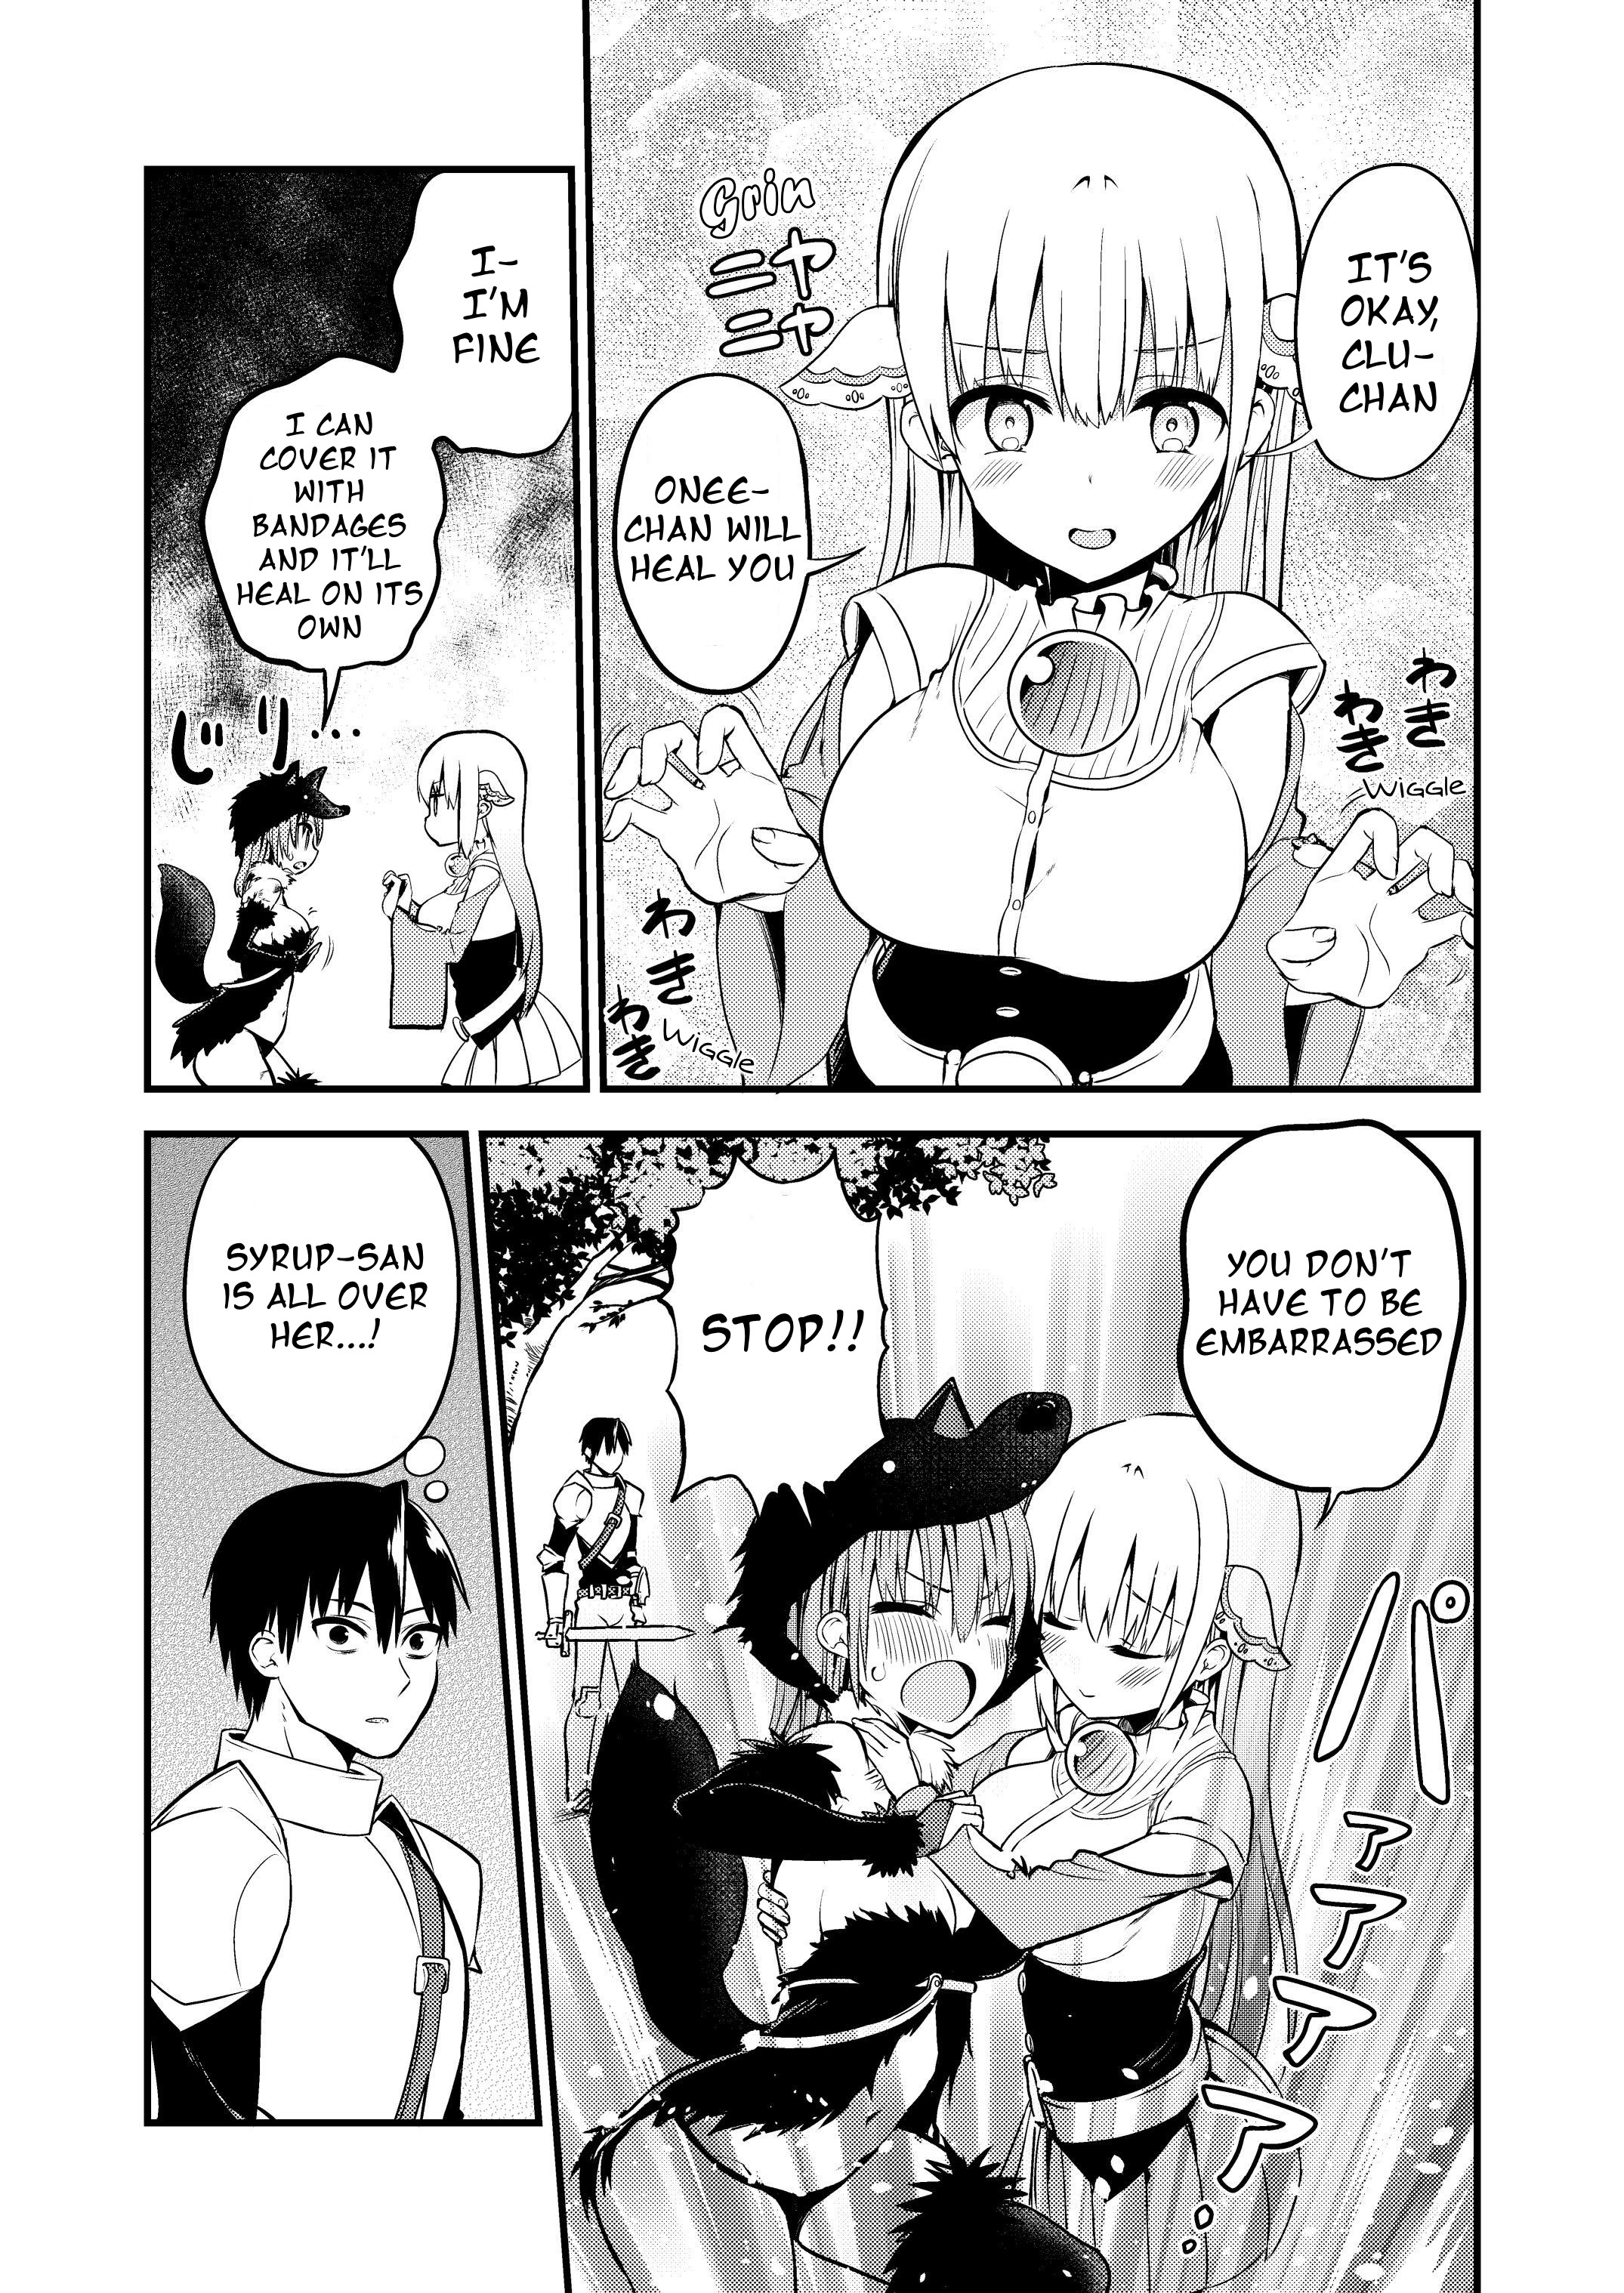 Shiro Madoushi Syrup-San Vol.1 Chapter 29: White Mage Syrup-San And Responses - Picture 1